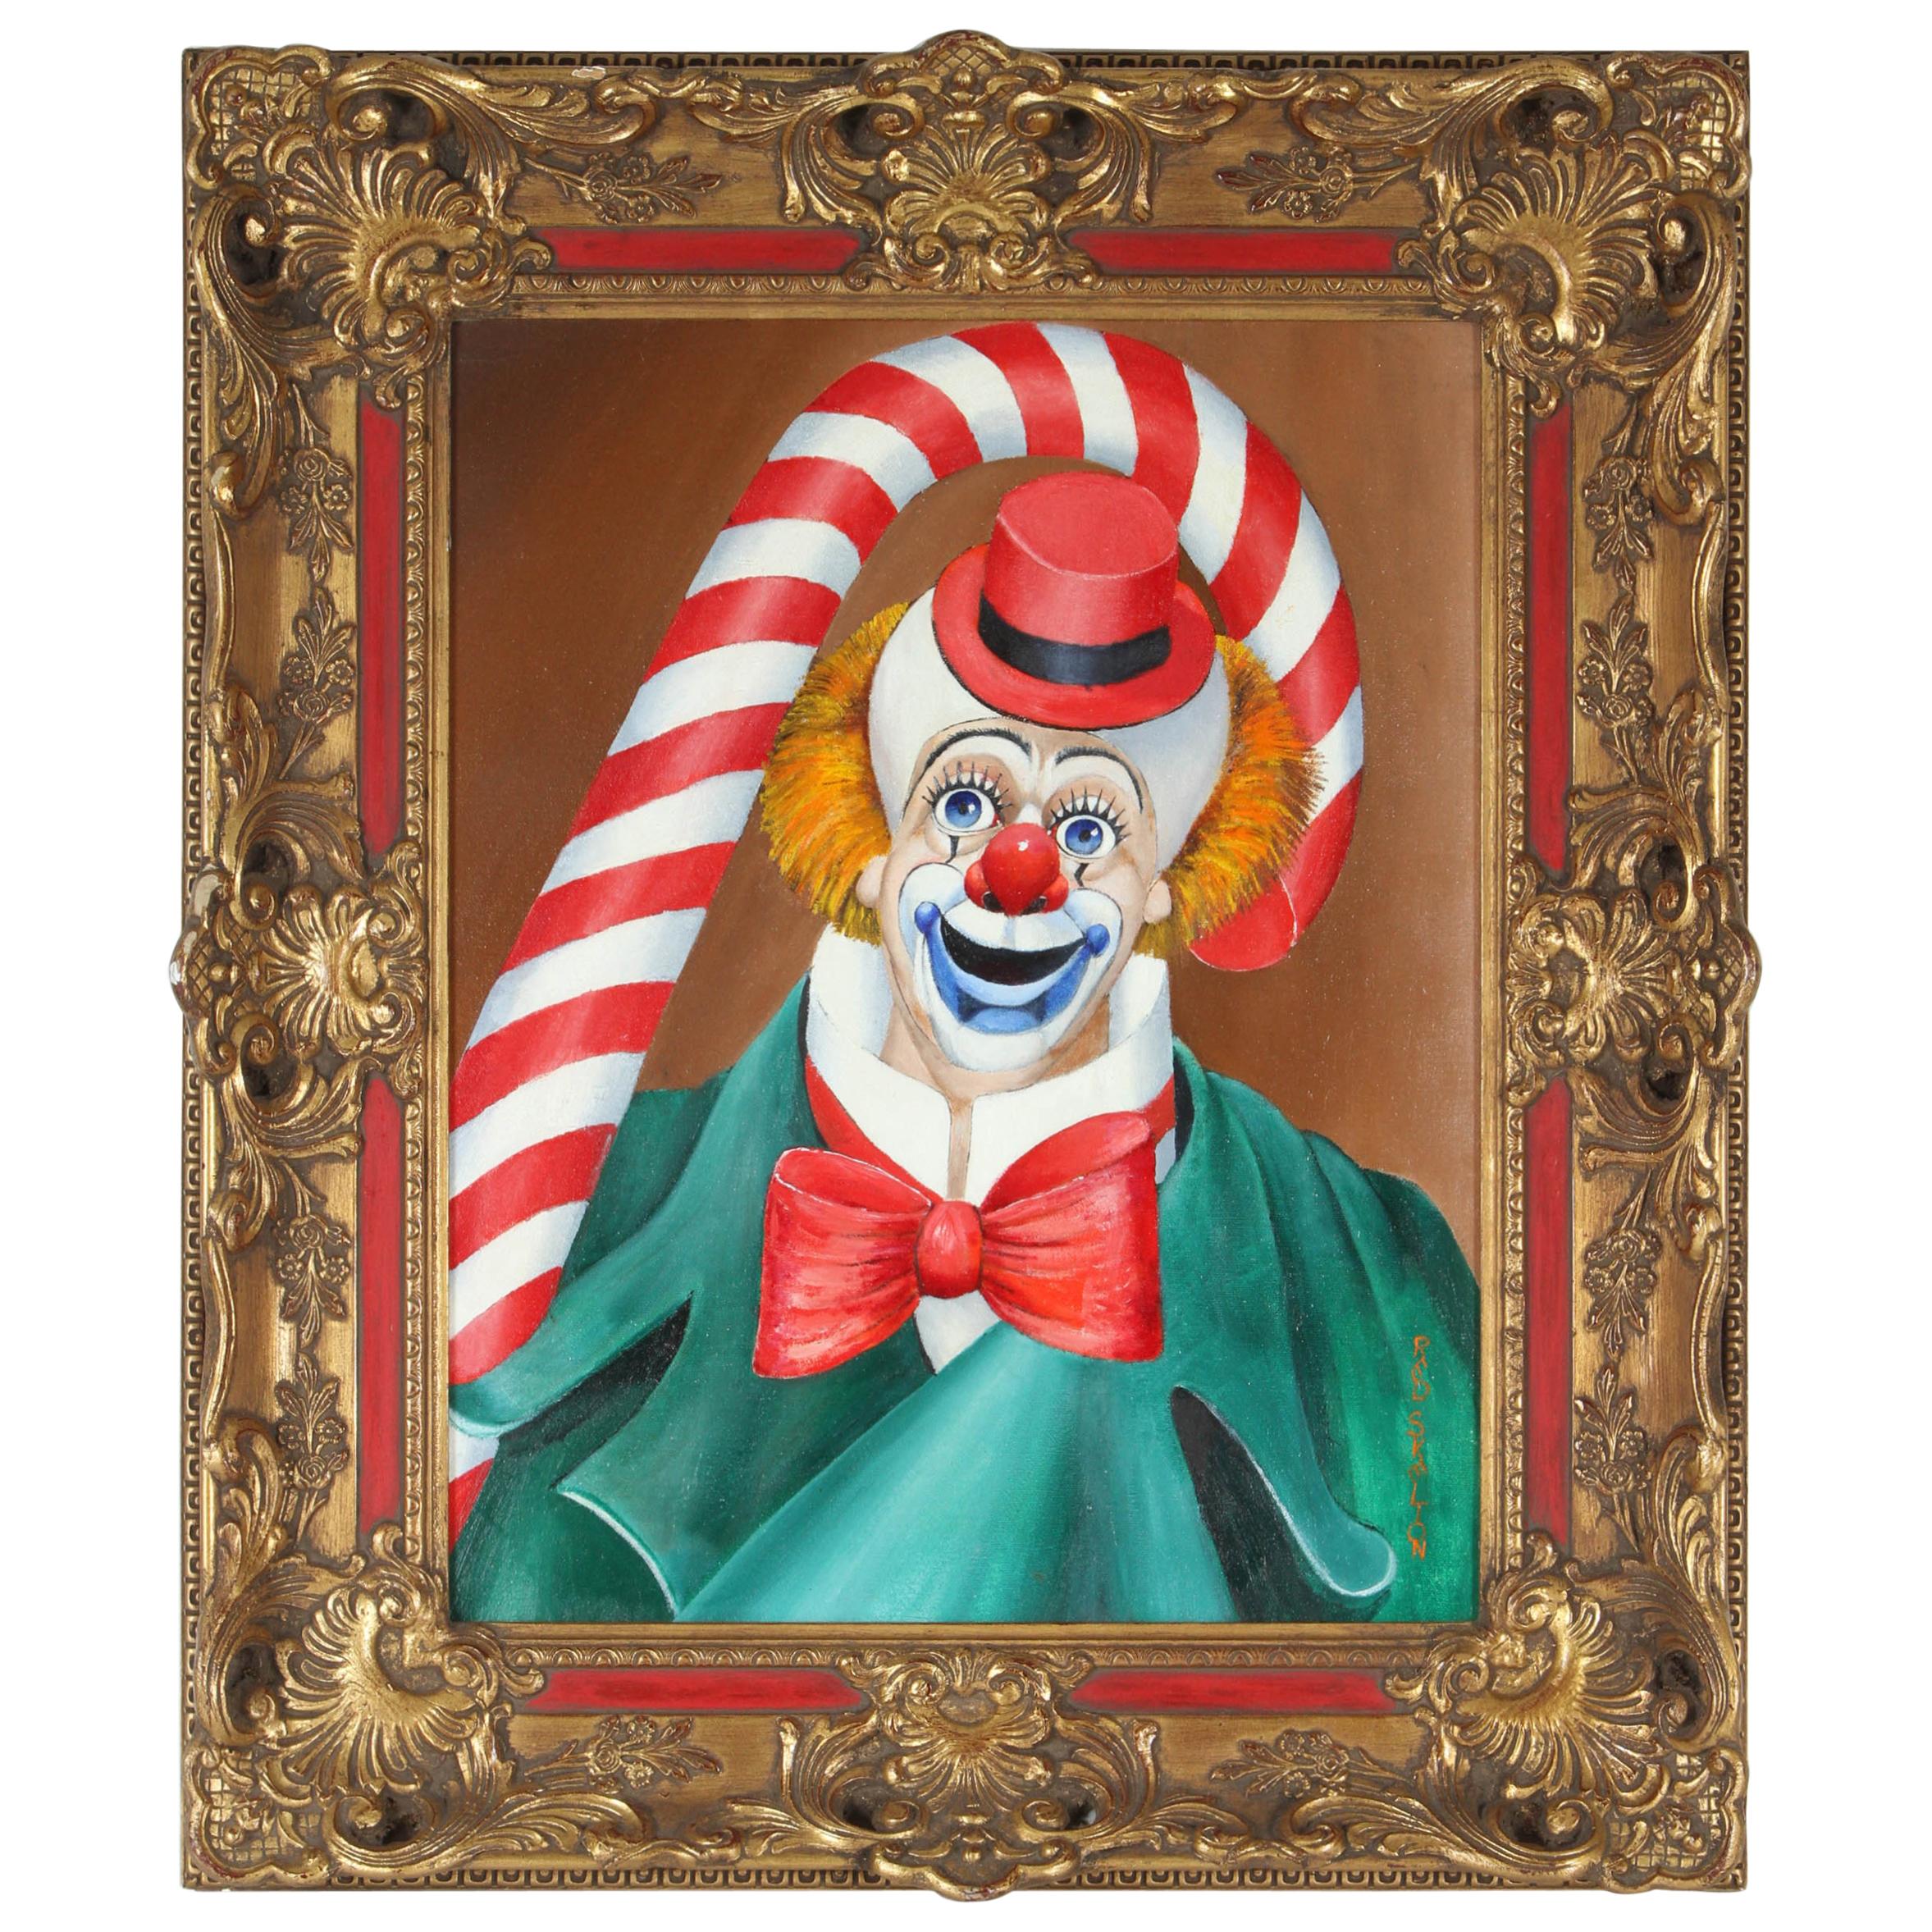 Original Signed Oil Painting of Clown by Red Skelton